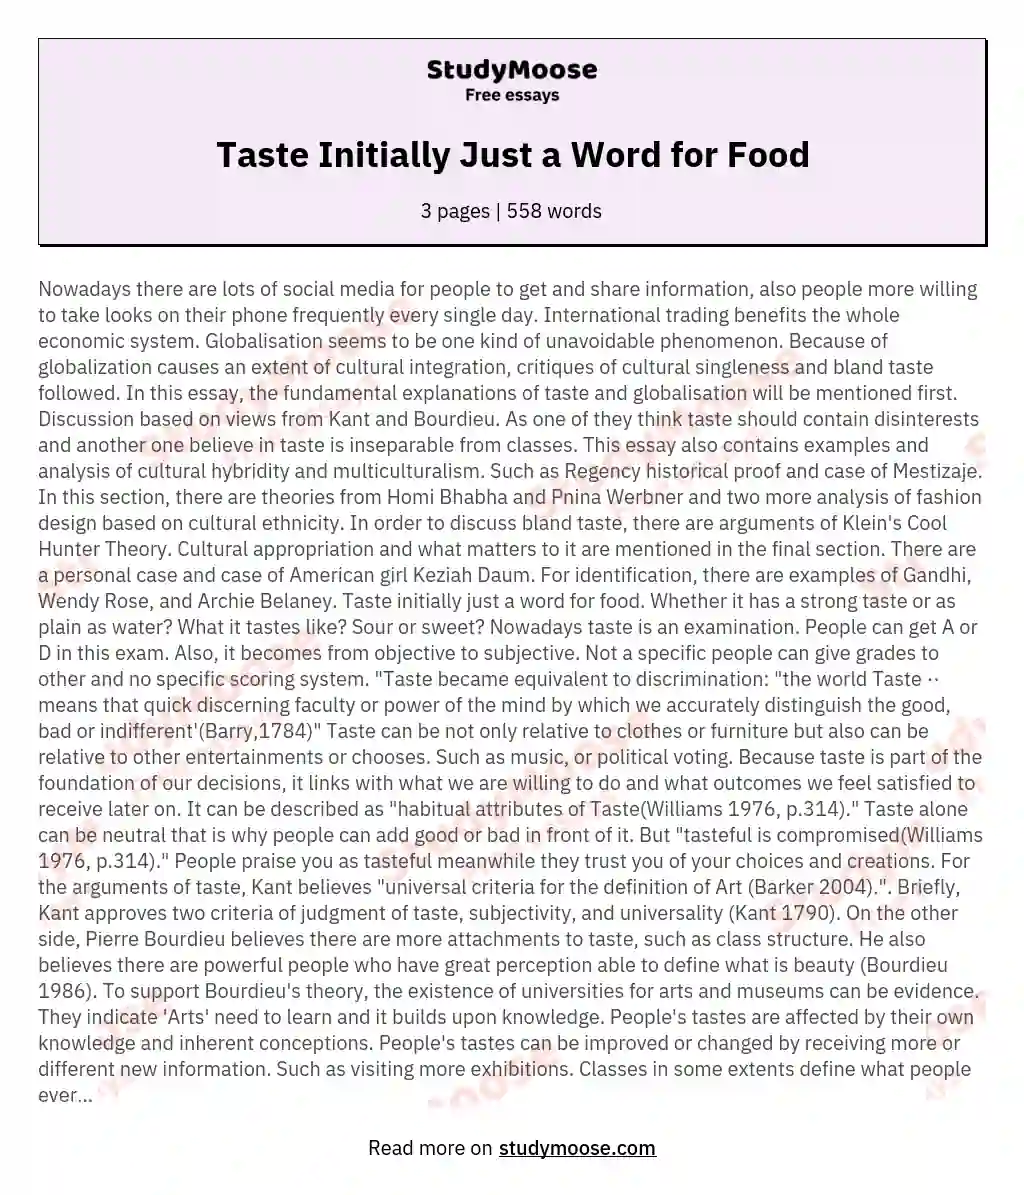 Taste Initially Just a Word for Food essay